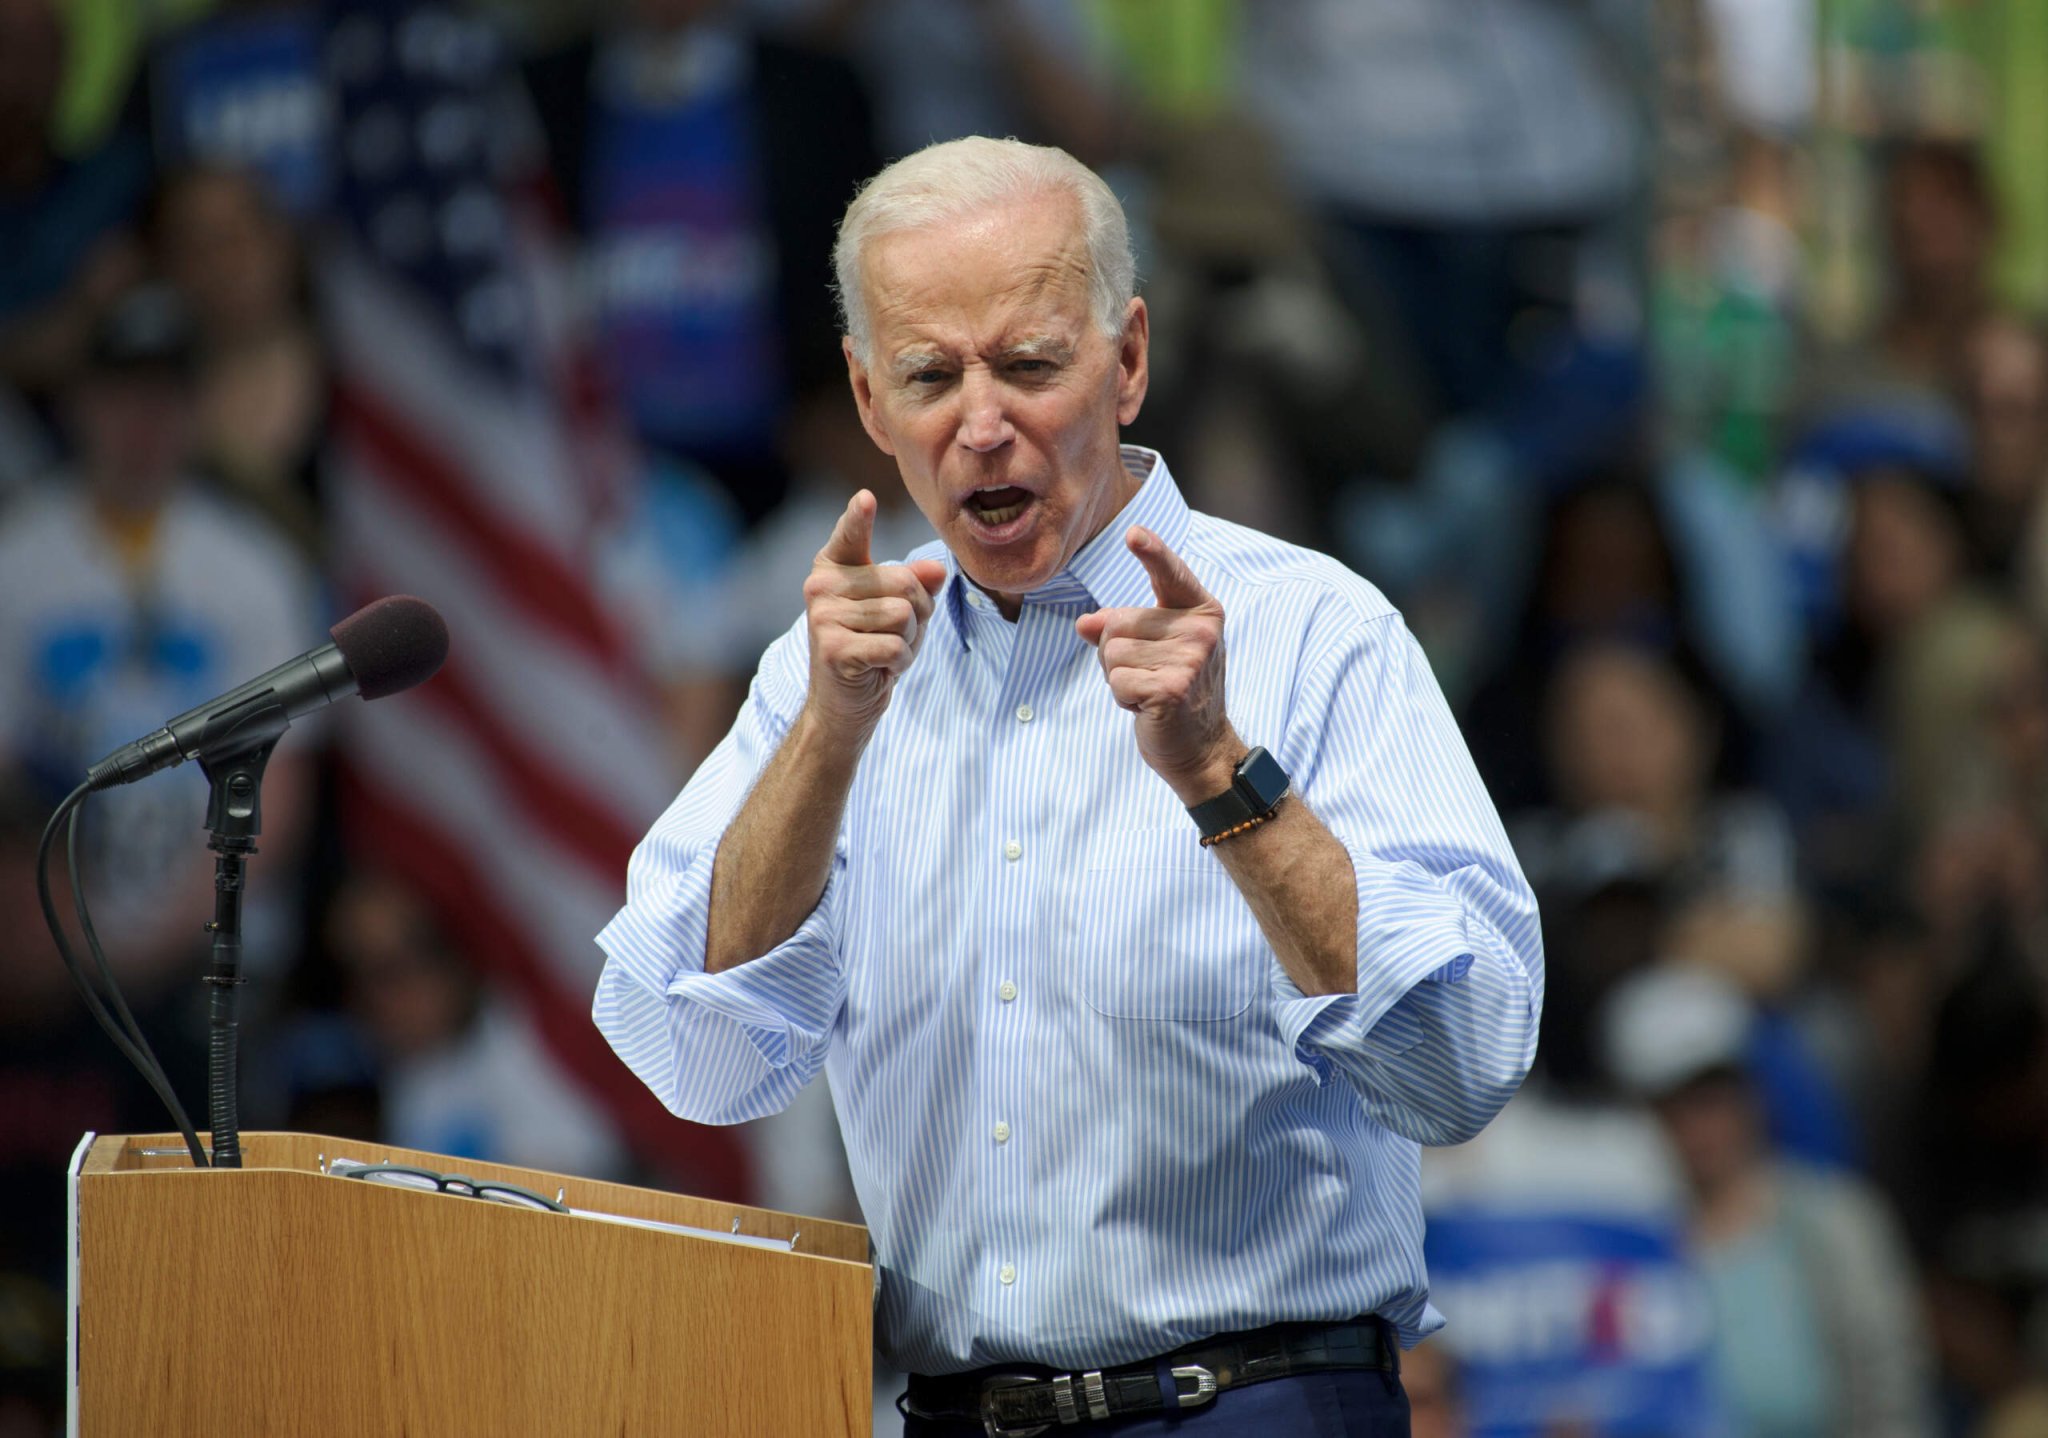 Electric Vehicles Will Likely Thrive Under A Biden Presidency